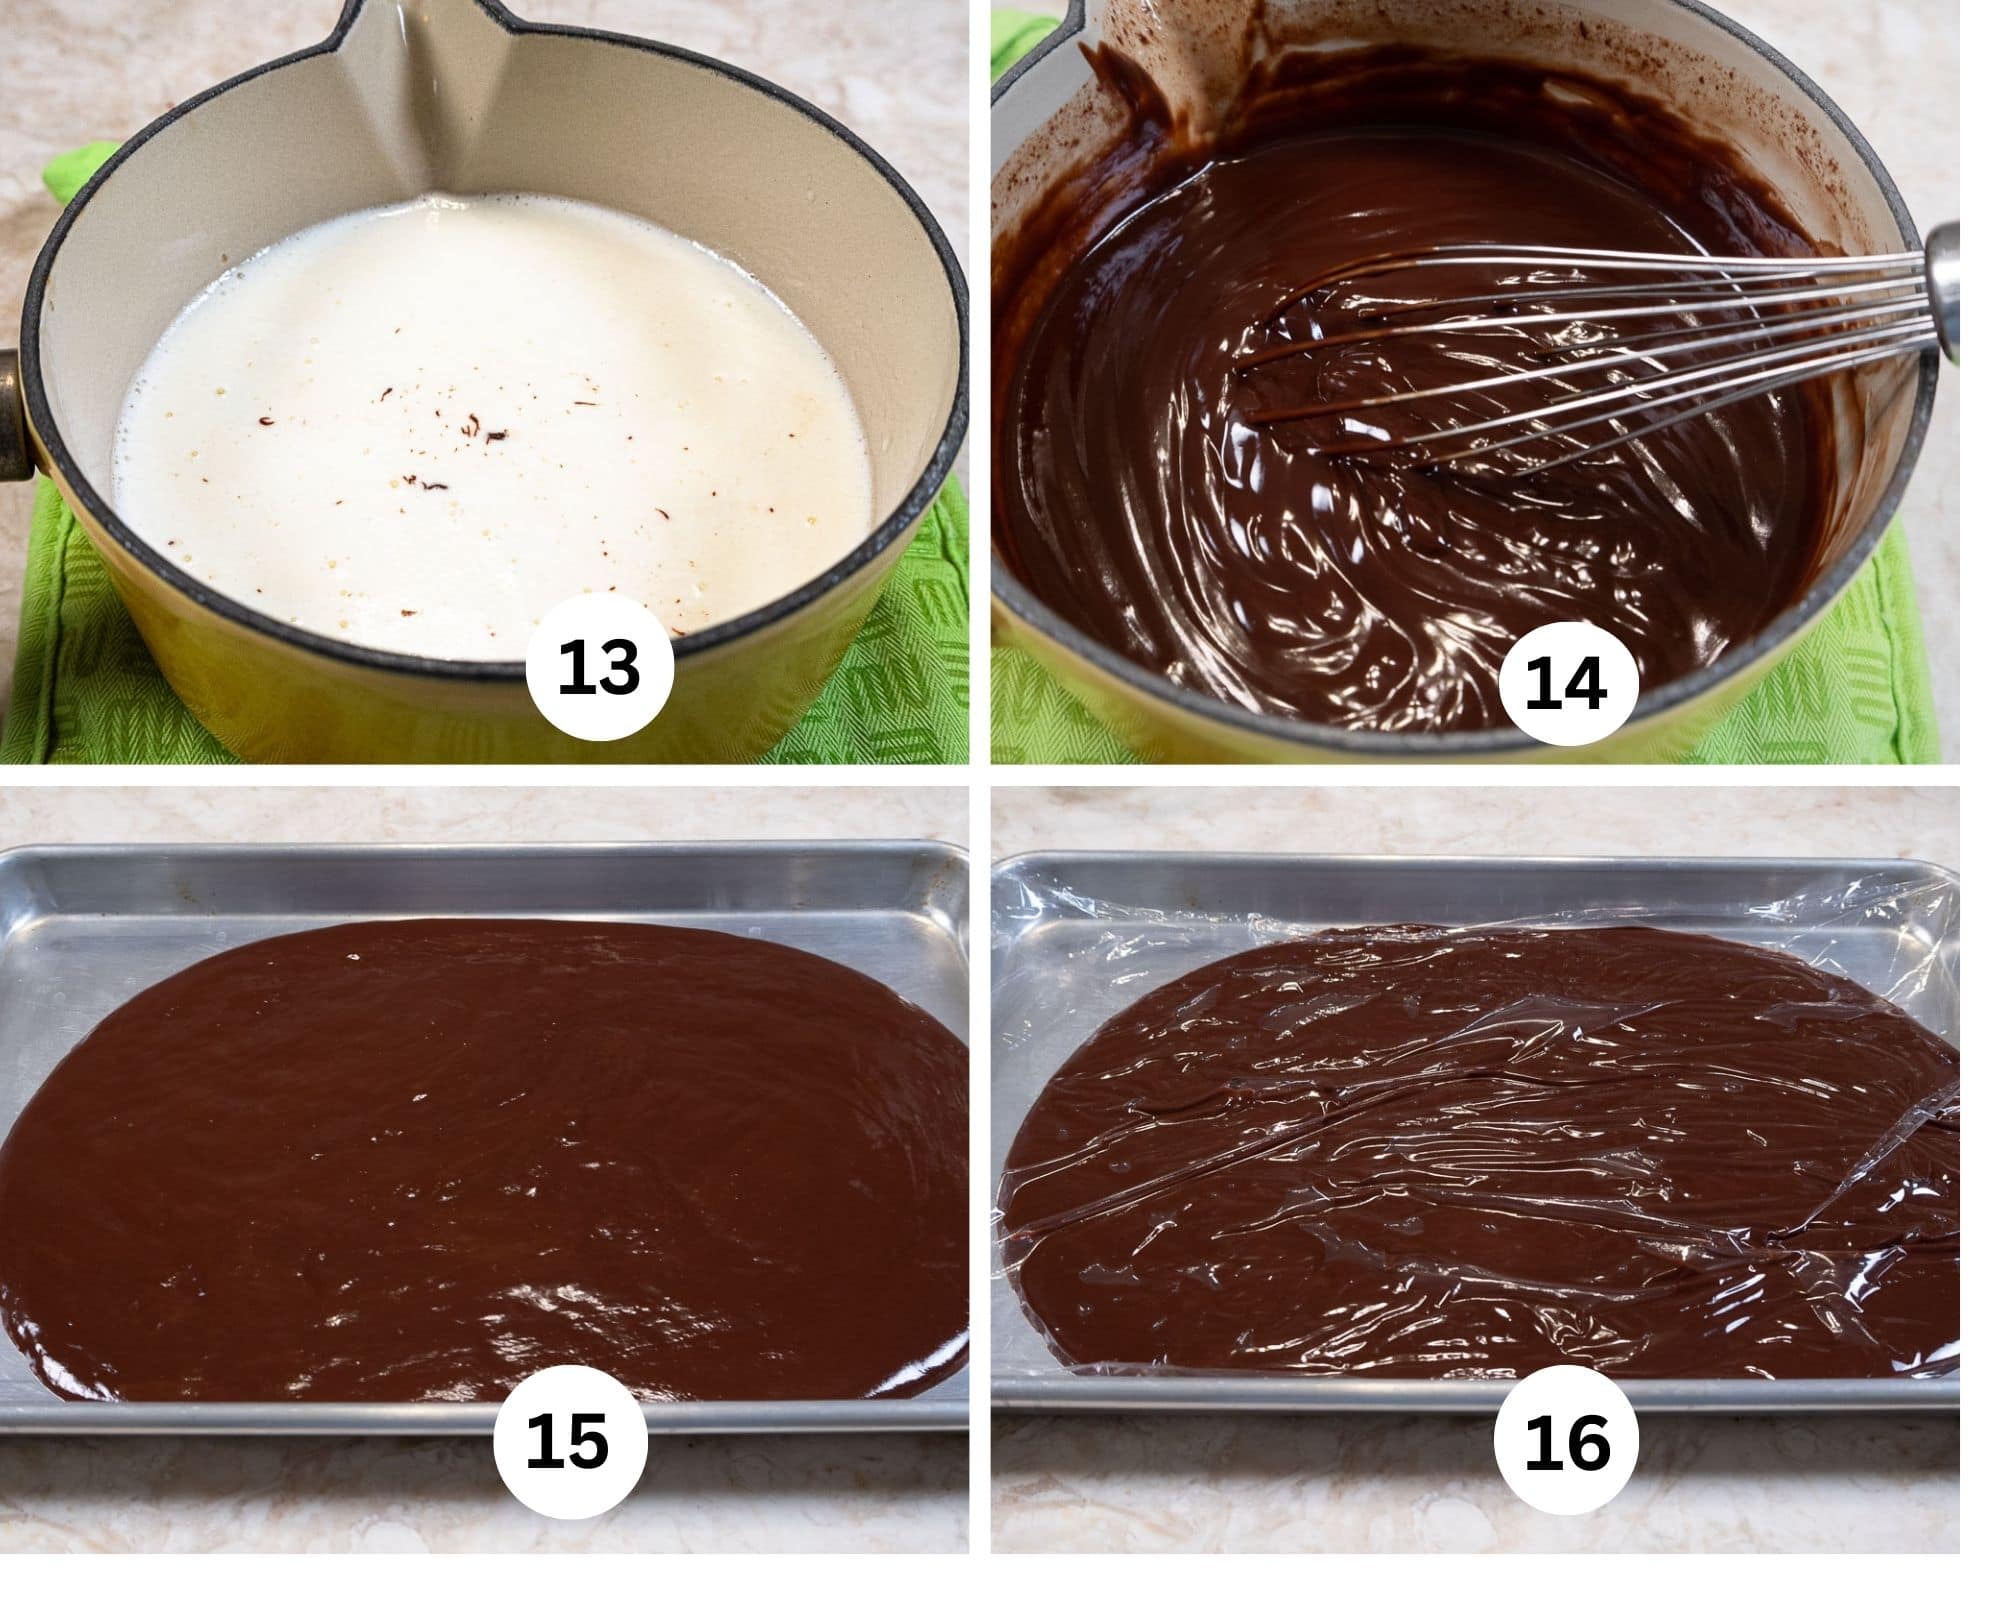 The chocolate is submerged under the cream, the cream and chocolate are whisked until smooth, the chocolate is spread on a pan, then covered with plastic wrap.